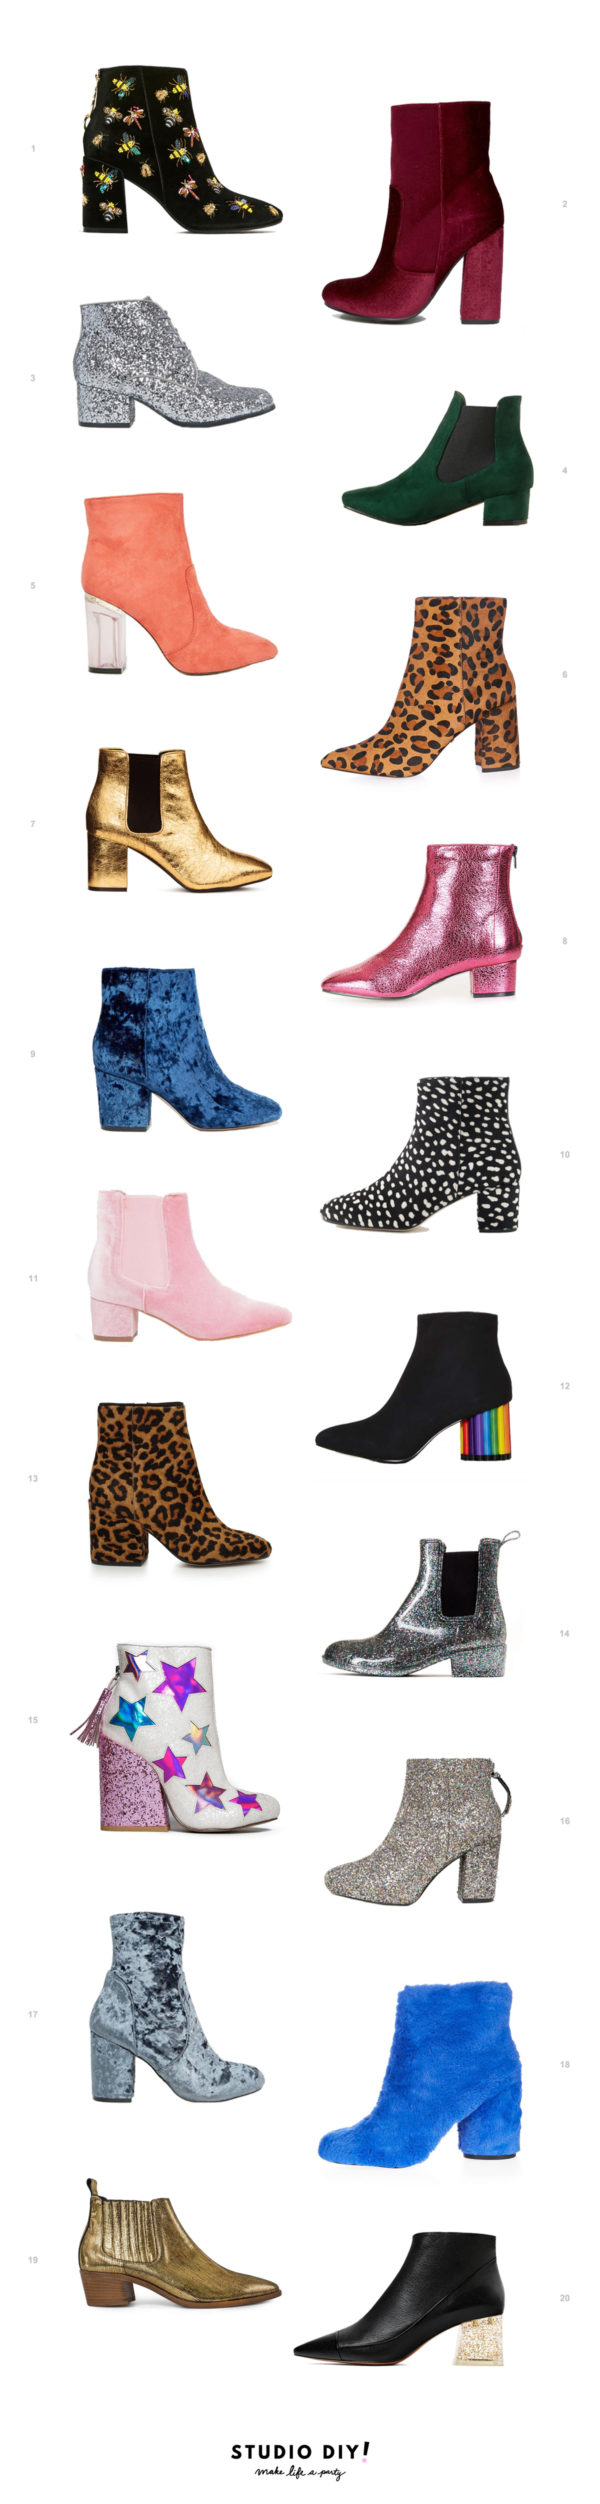 20 Statement Boots You Gotta See